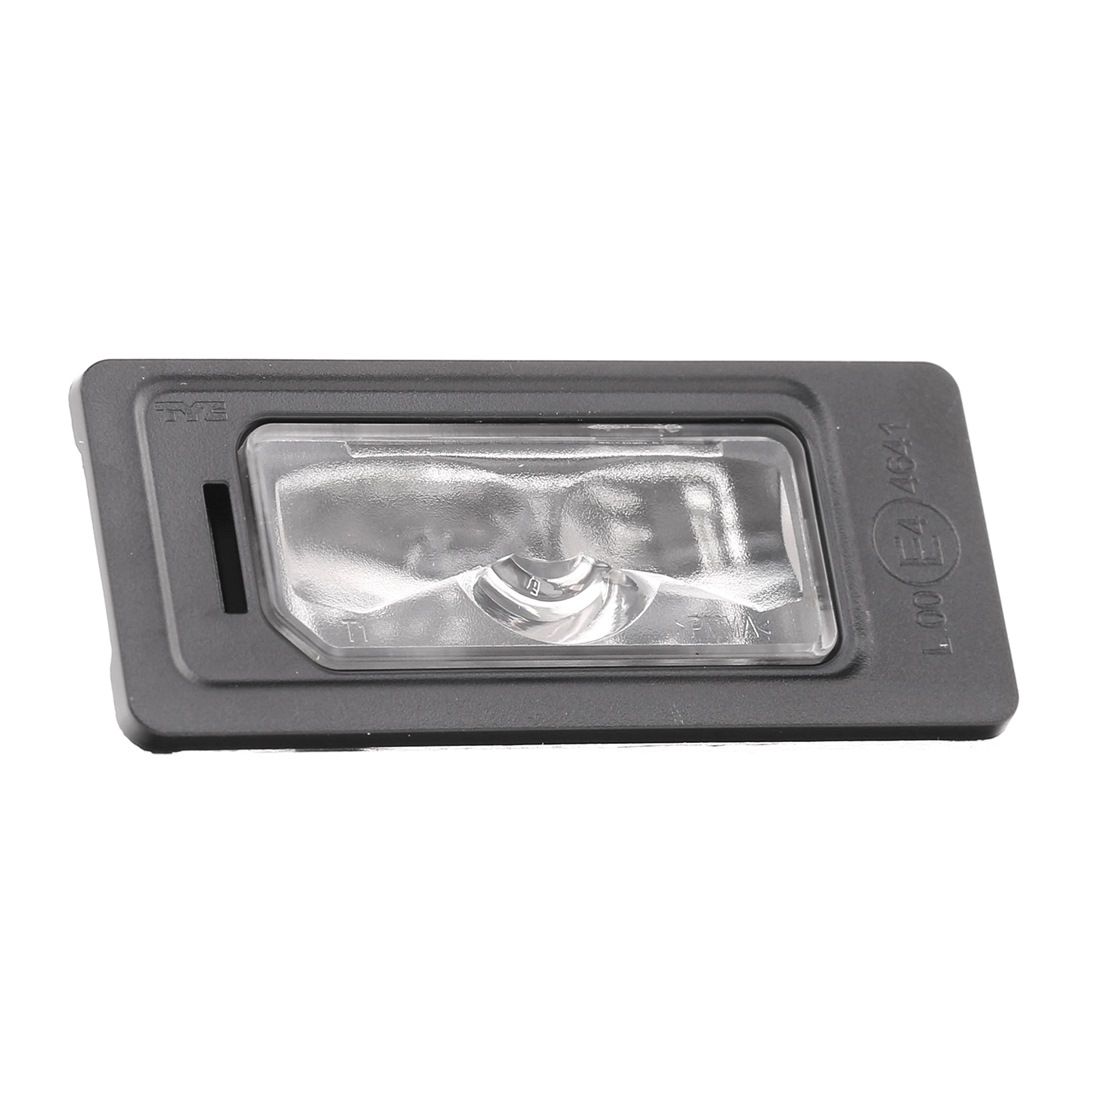 TYC 150533002 Number plate light Golf BA5 1.5 TGI 131 hp Petrol/Compressed Natural Gas (CNG) 2021 price